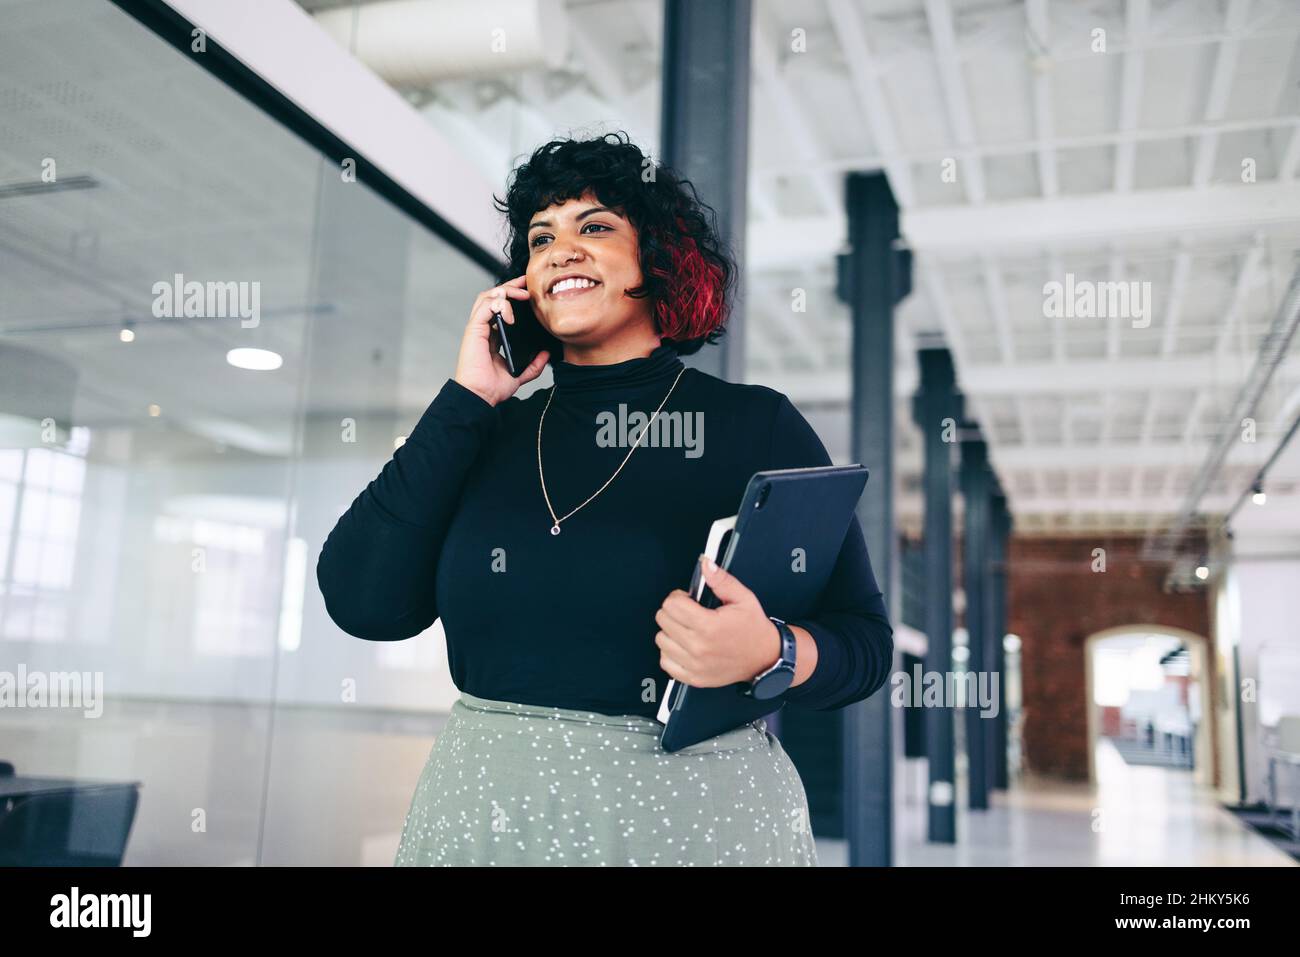 Happy businesswoman taking a phone call in an office. Creative businesswoman closing a business deal over the phone in a modern workplace. Successful Stock Photo